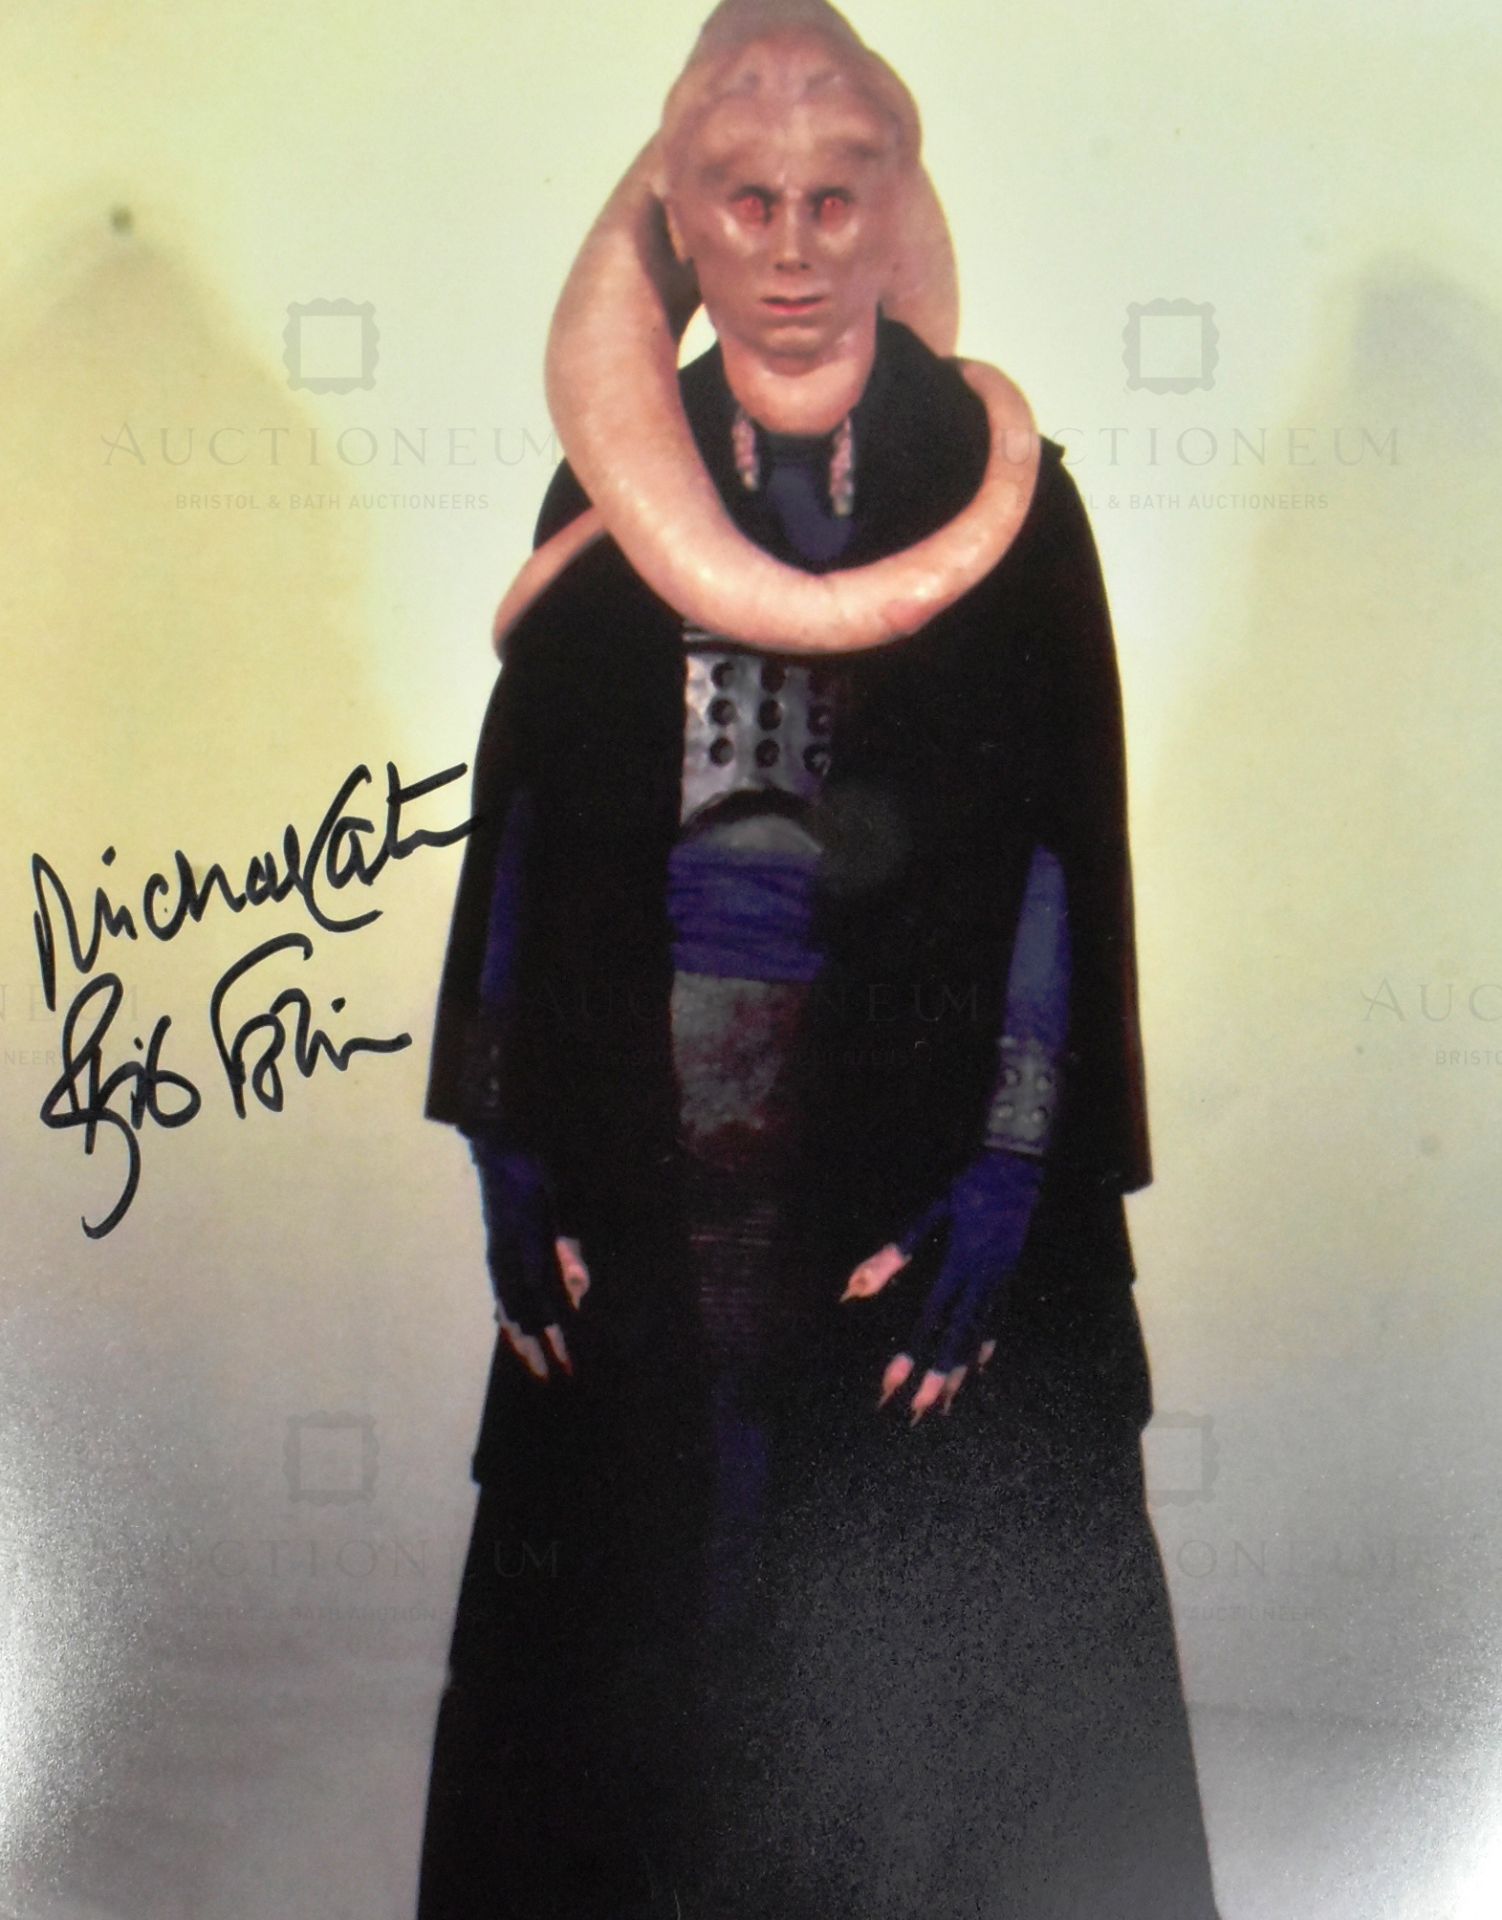 STAR WARS - RETURN OF THE JEDI - COLLECTION OF SIGNED PHOTOS - Image 4 of 5